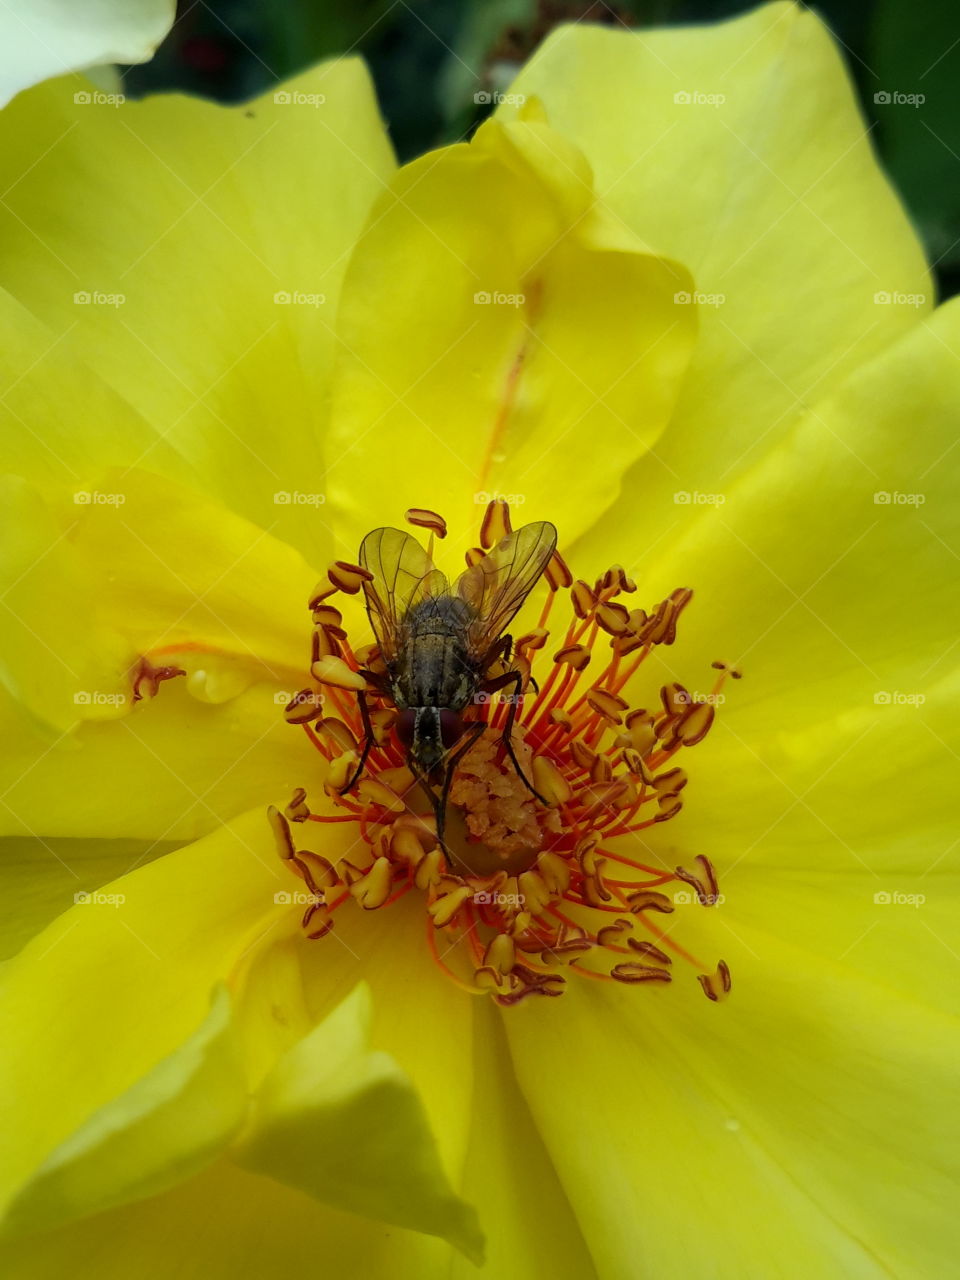 Fly on the yellow rose